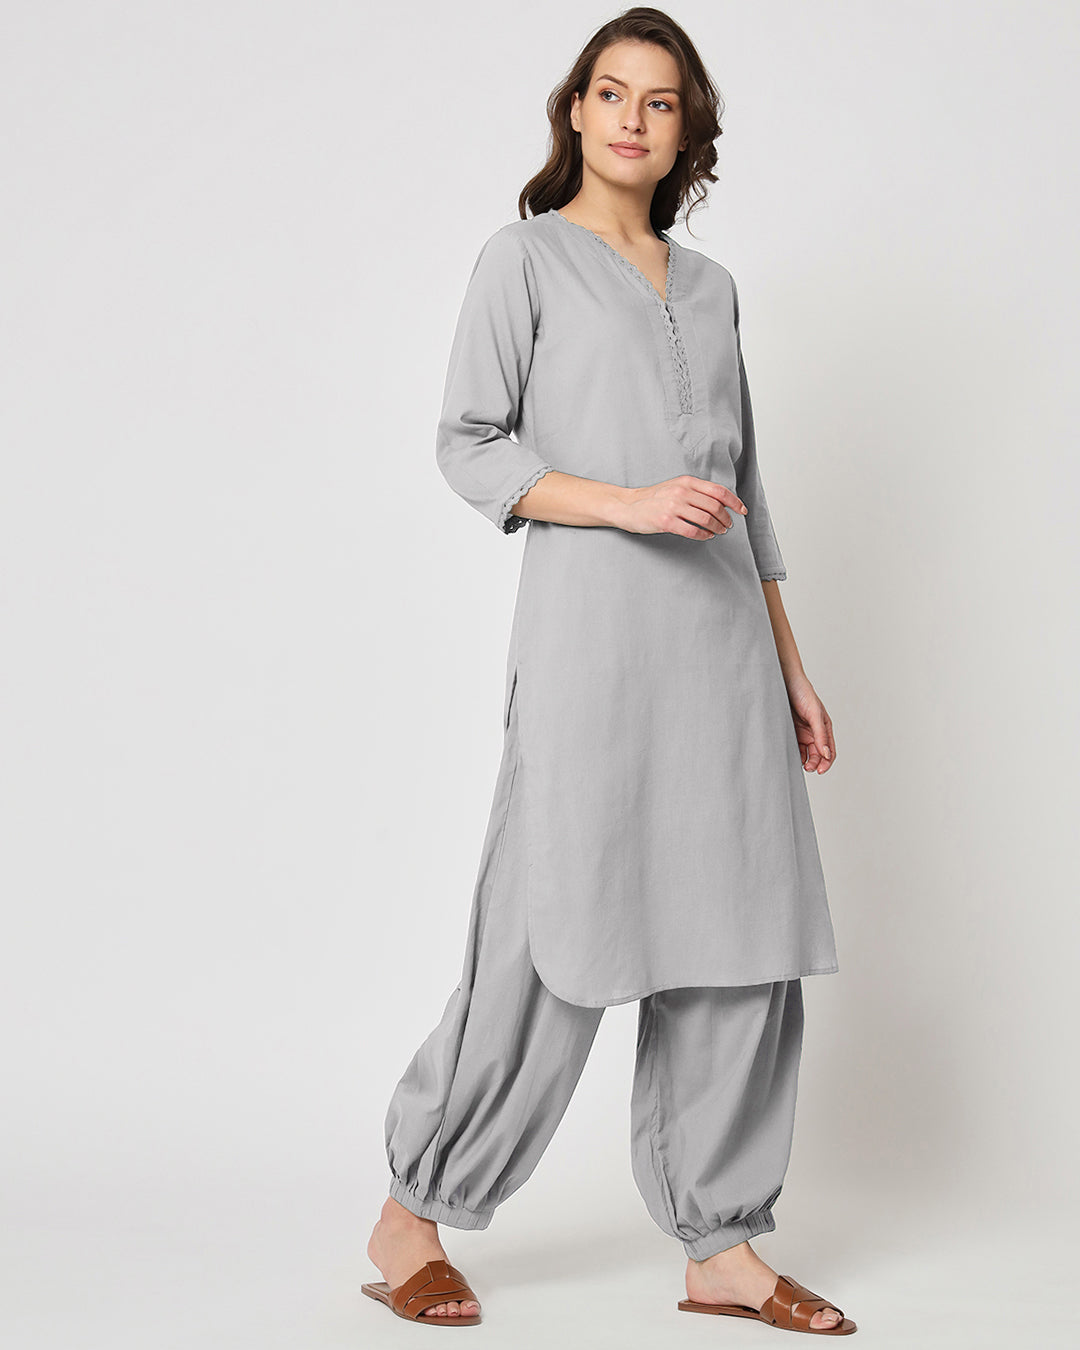 Iced Grey Lace Affair Solid Kurta (Without Bottoms)